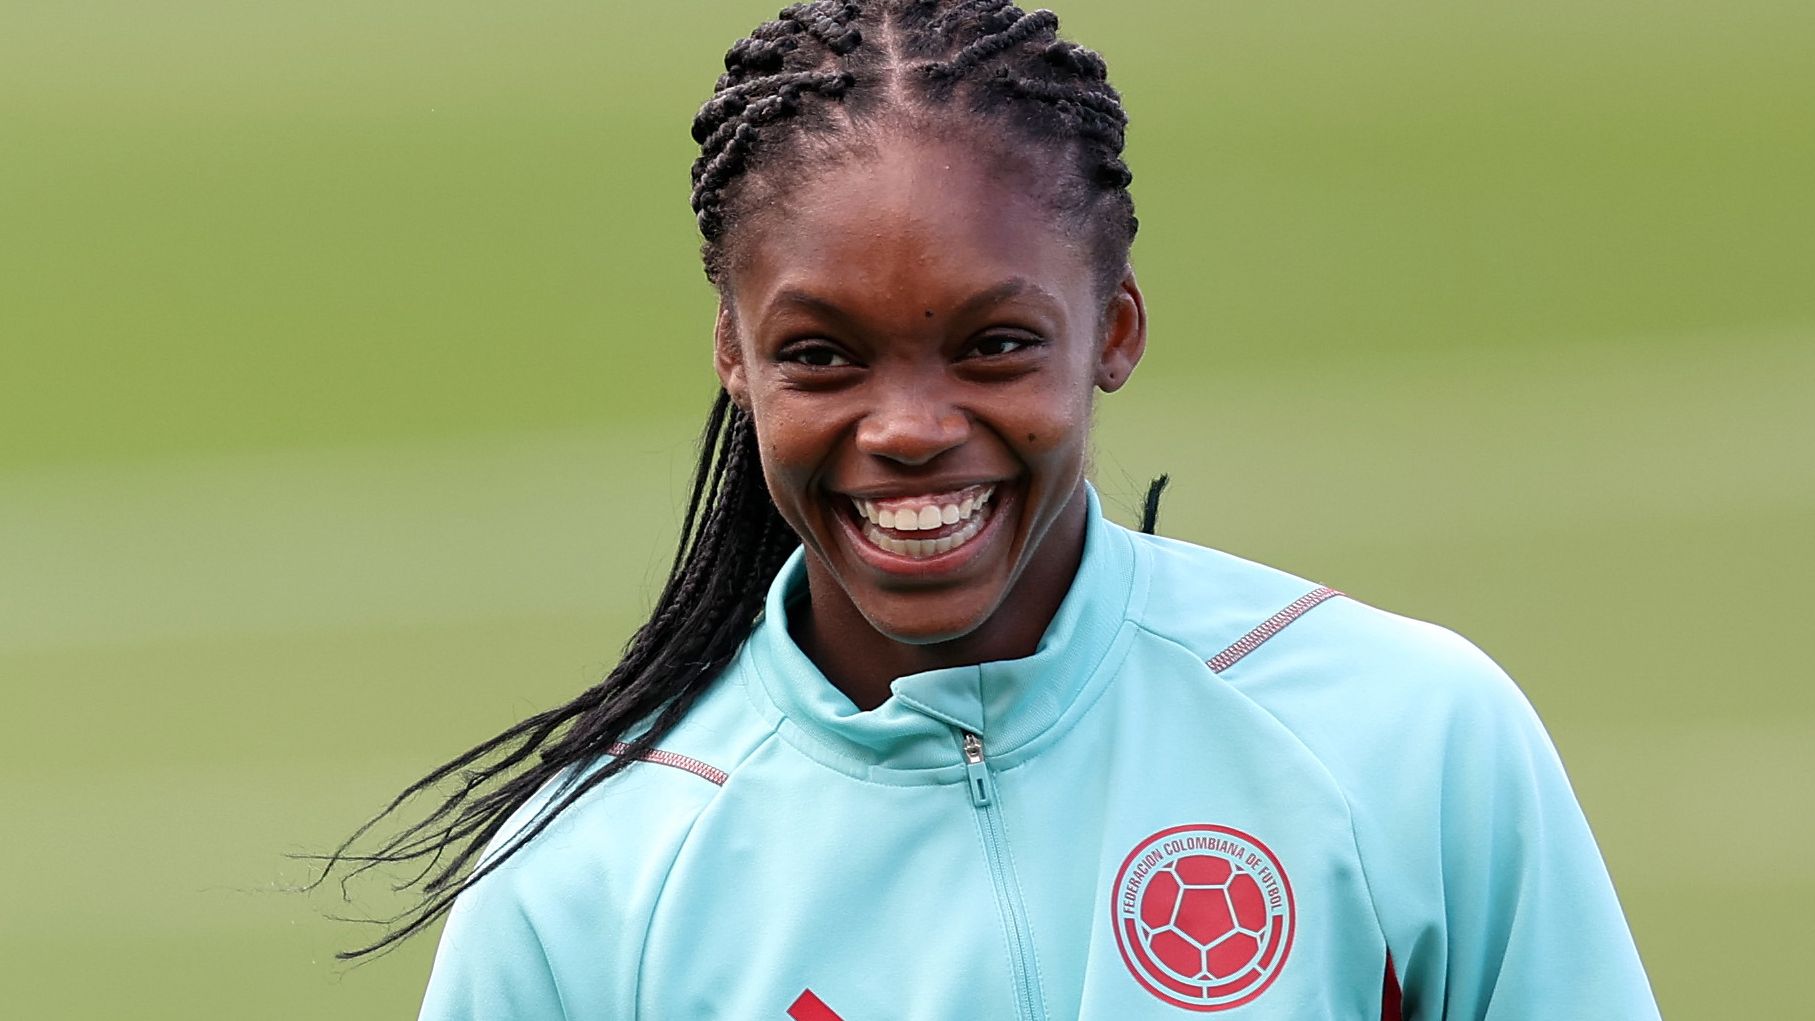 Colombian teen star to make World Cup debut after surviving crushing cancer diagnosis